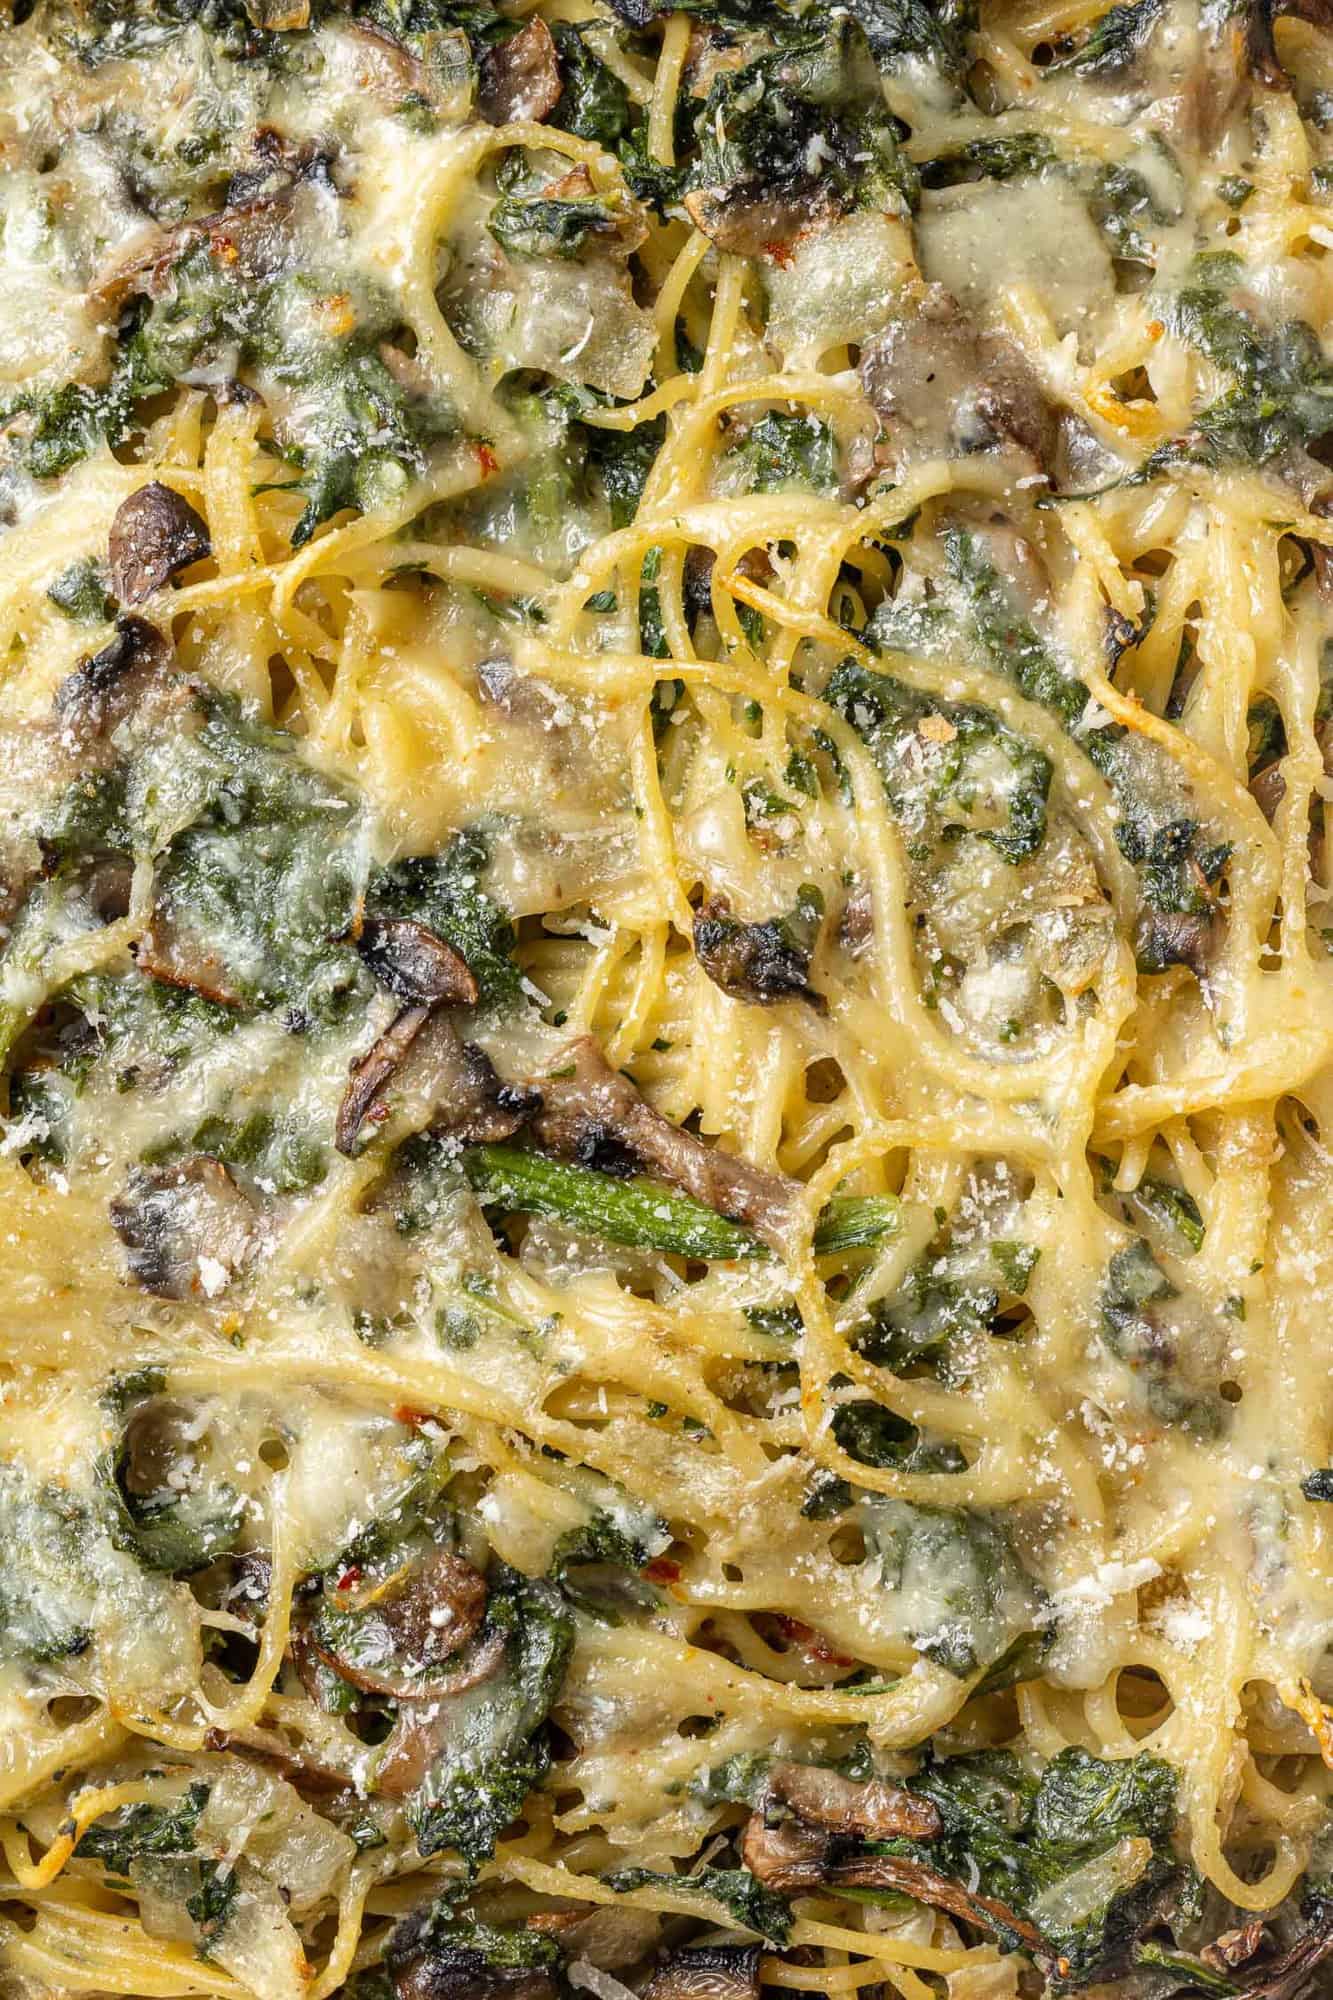 Very close up image of baked spaghetti with cheese, spinach, and mushrooms.